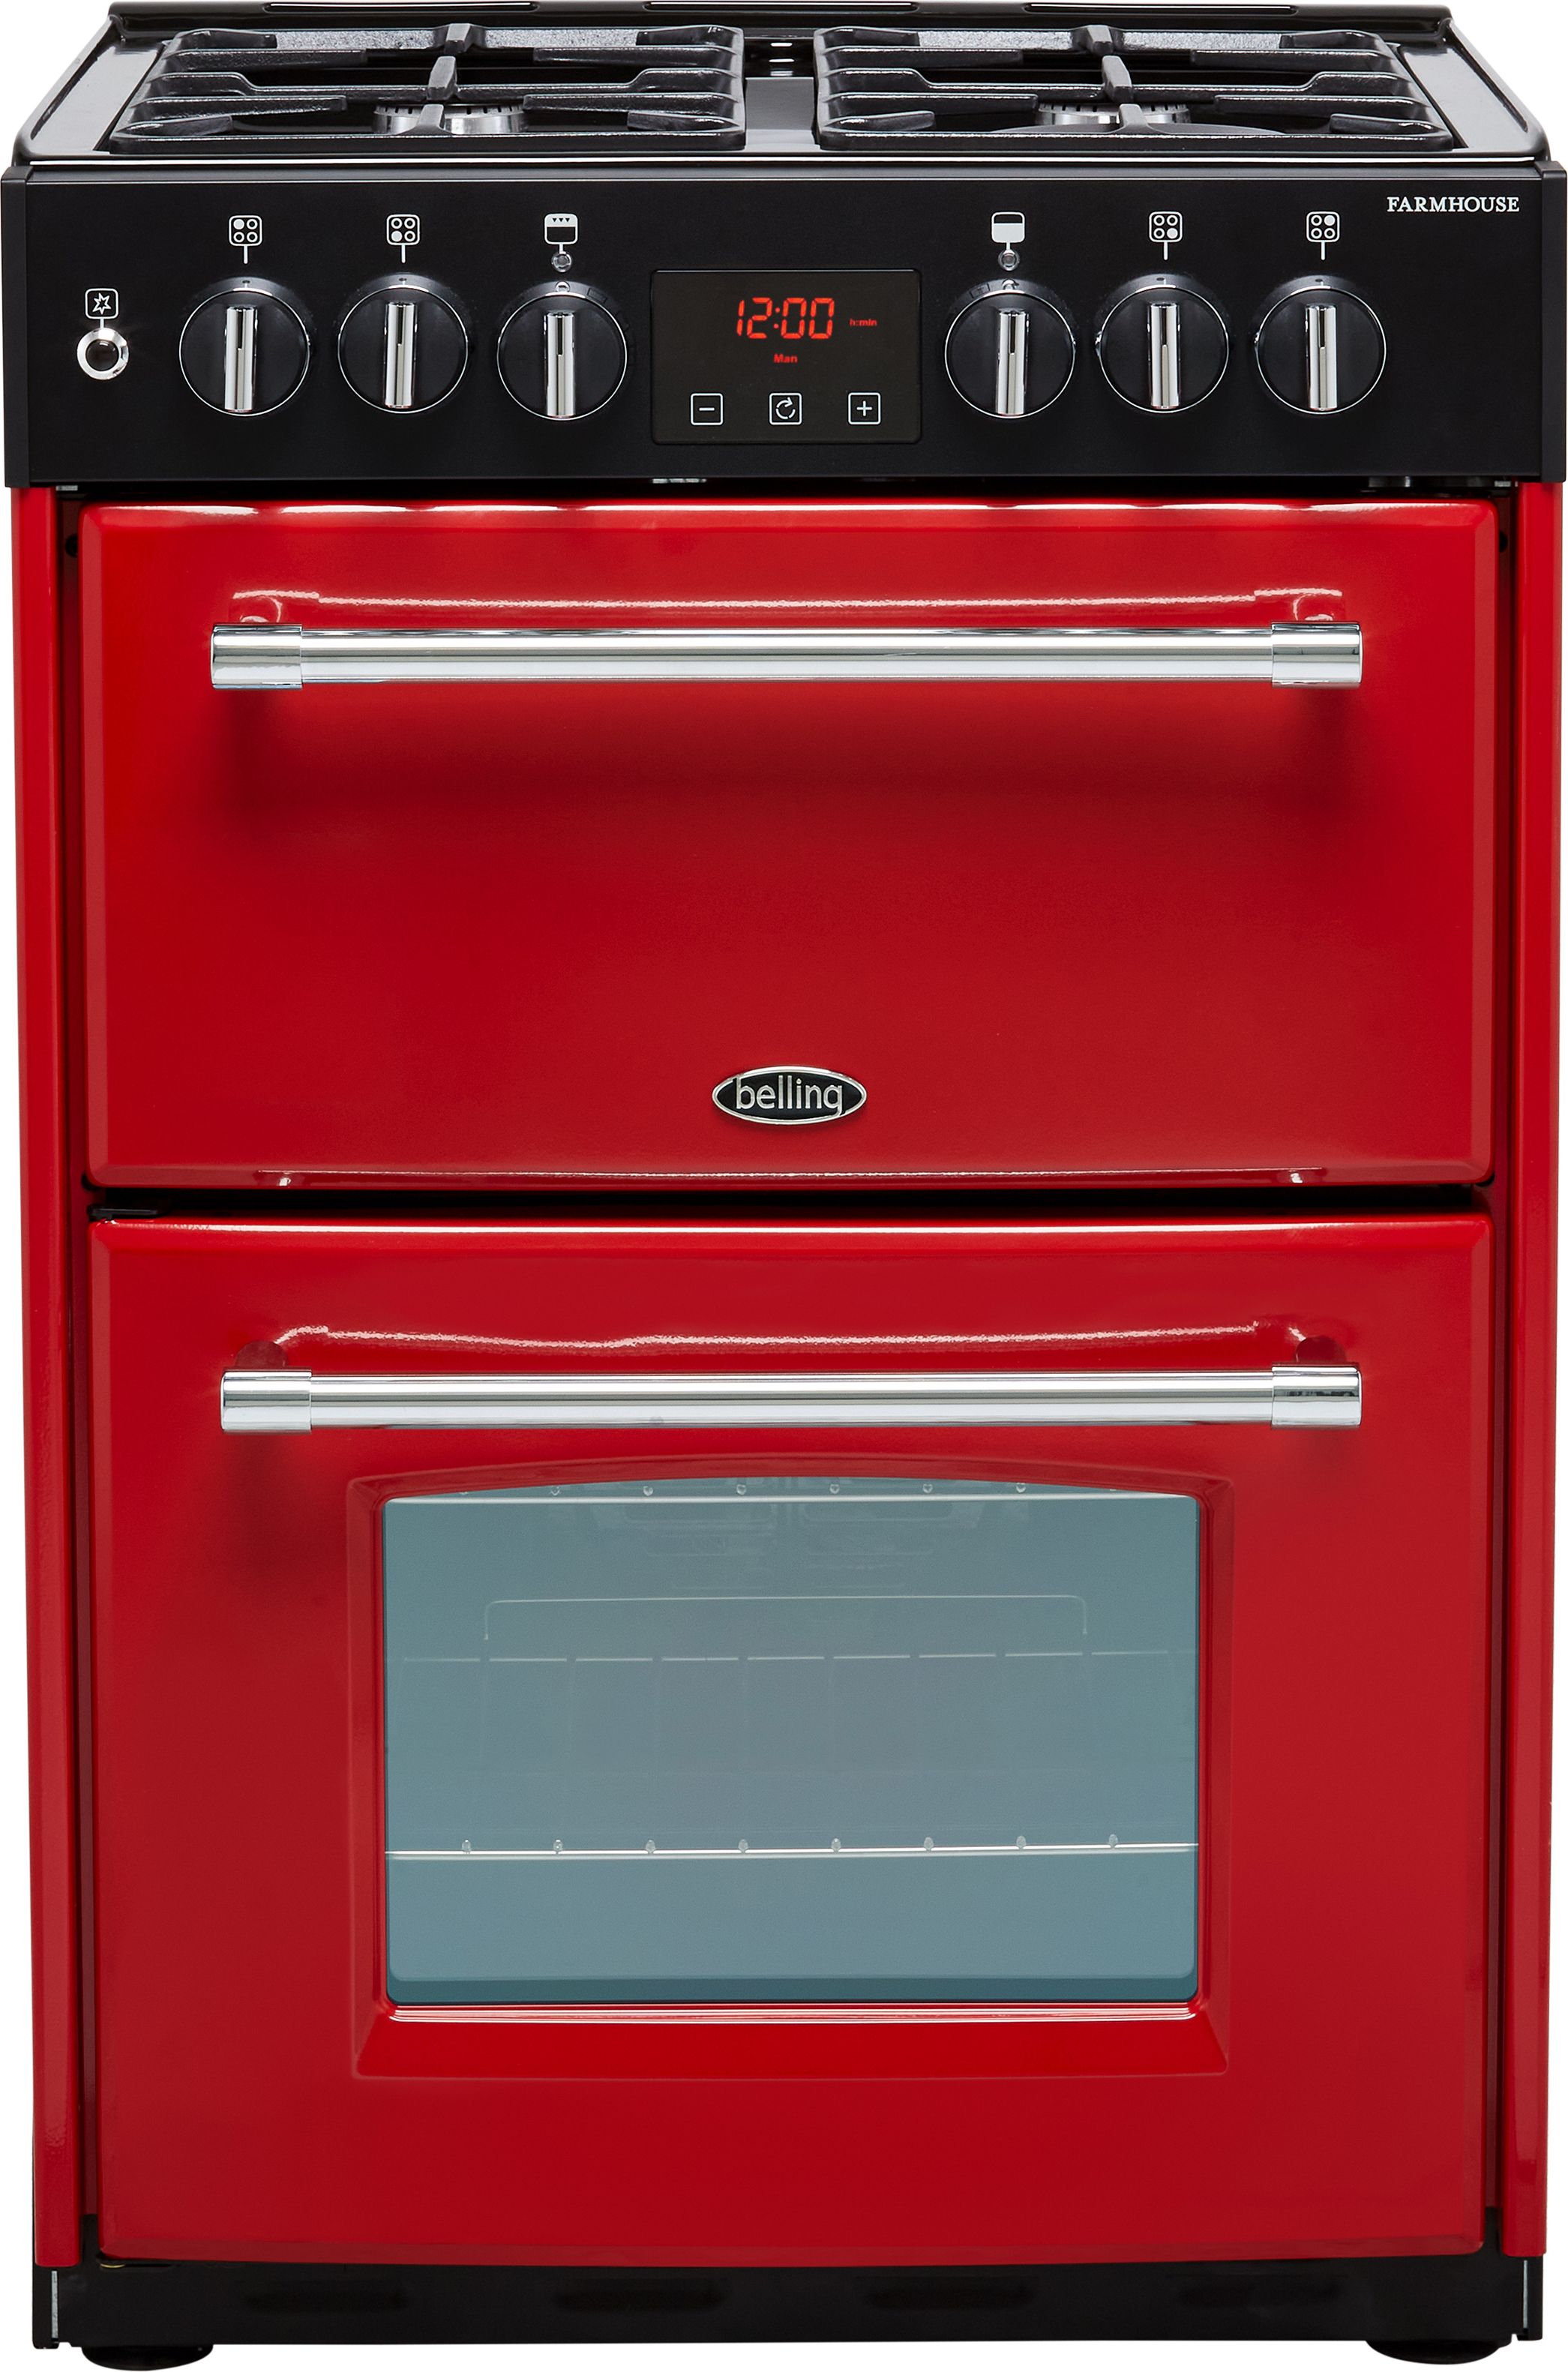 Belling Farmhouse60DF 60cm Freestanding Dual Fuel Cooker - Hot Jalapeno - A/A Rated, Red